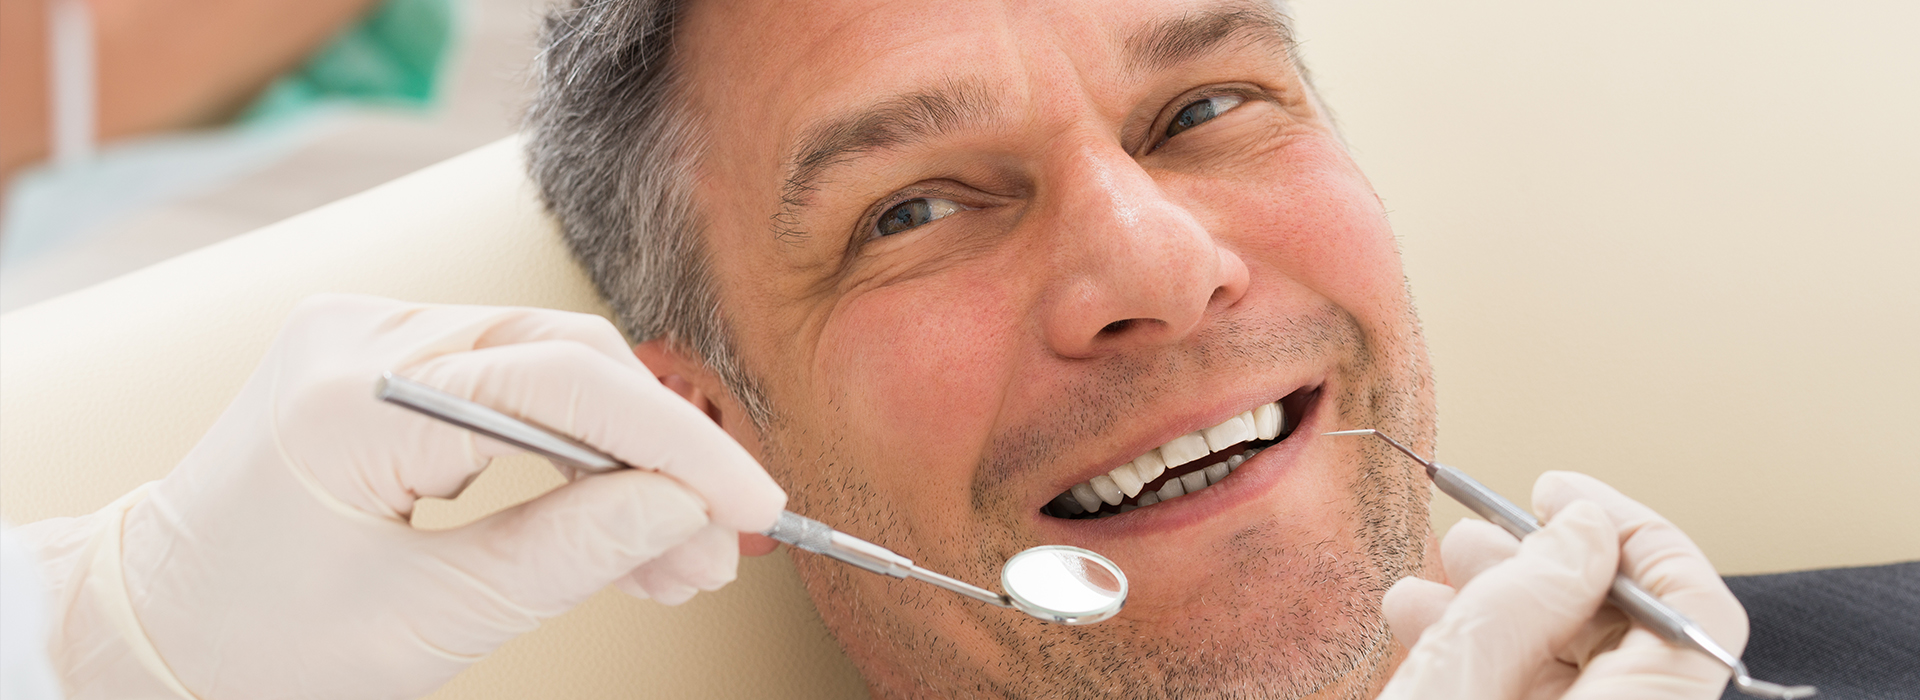 New Image Dentistry | Periodontal Treatment, All-on-4 reg  and Ceramic Crowns